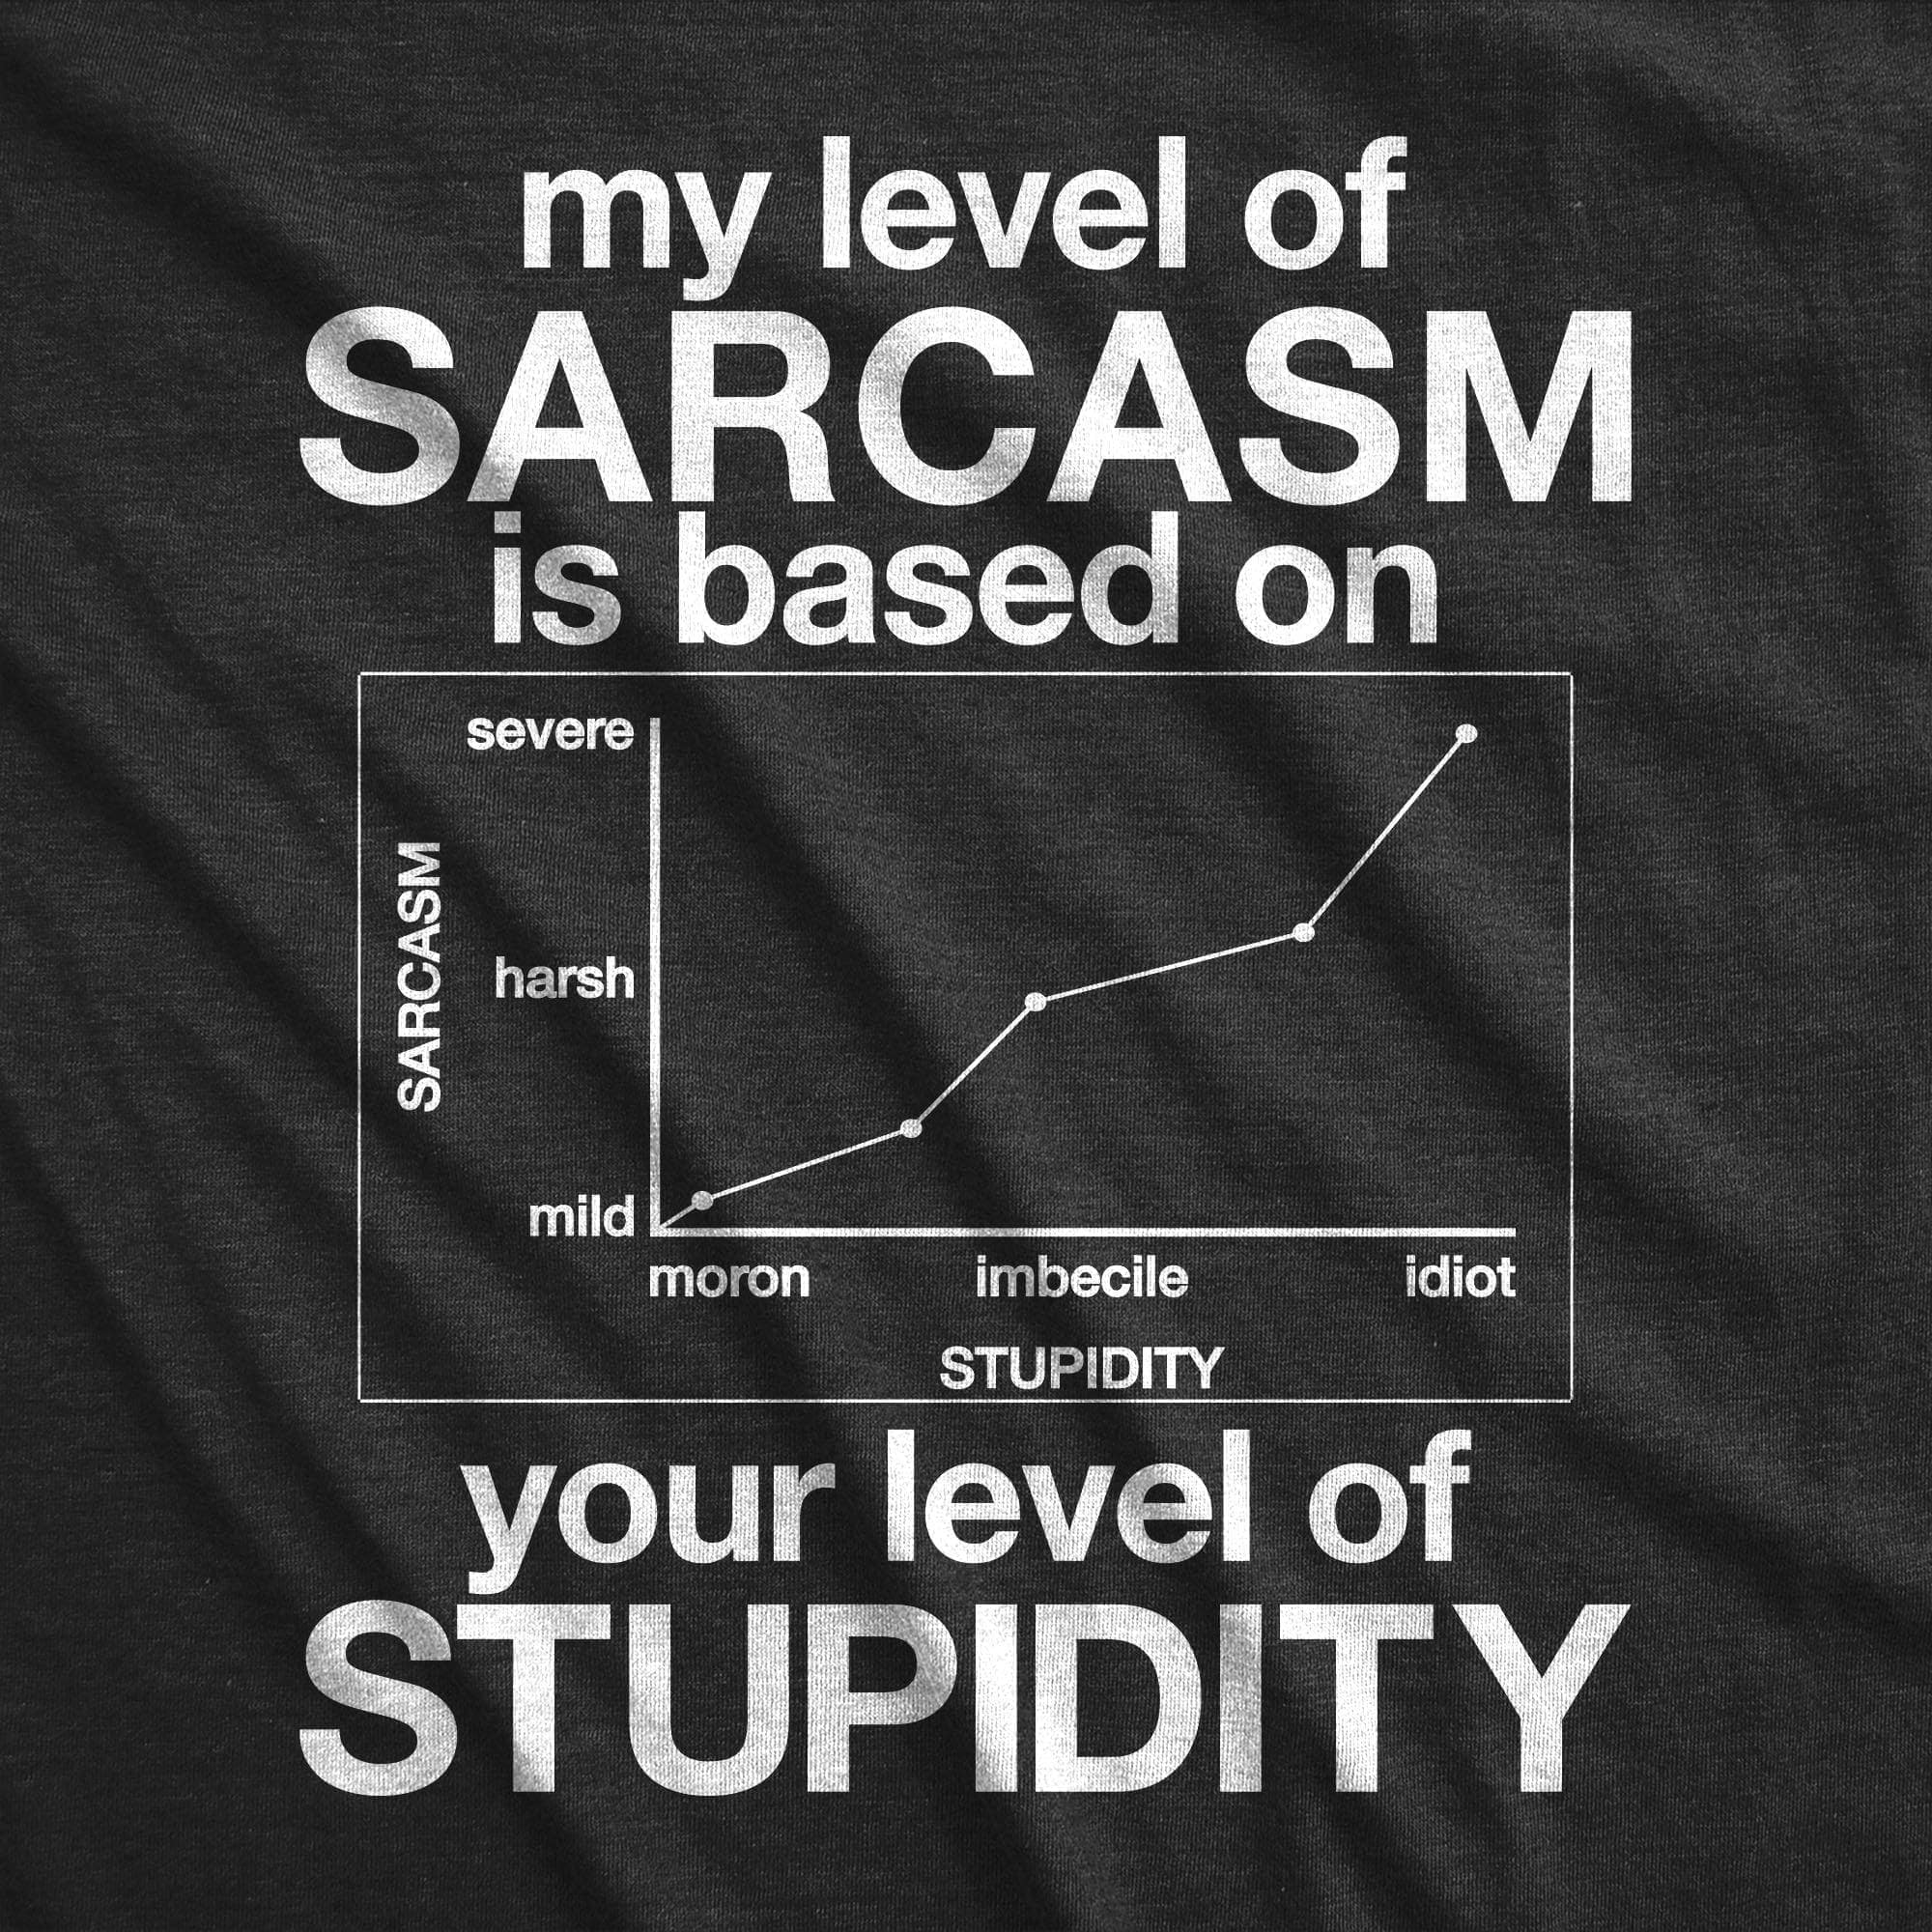 My Level Of Sarcasm Is Based On Your Level Of Stupidity Men's Tshirt  -  Crazy Dog T-Shirts